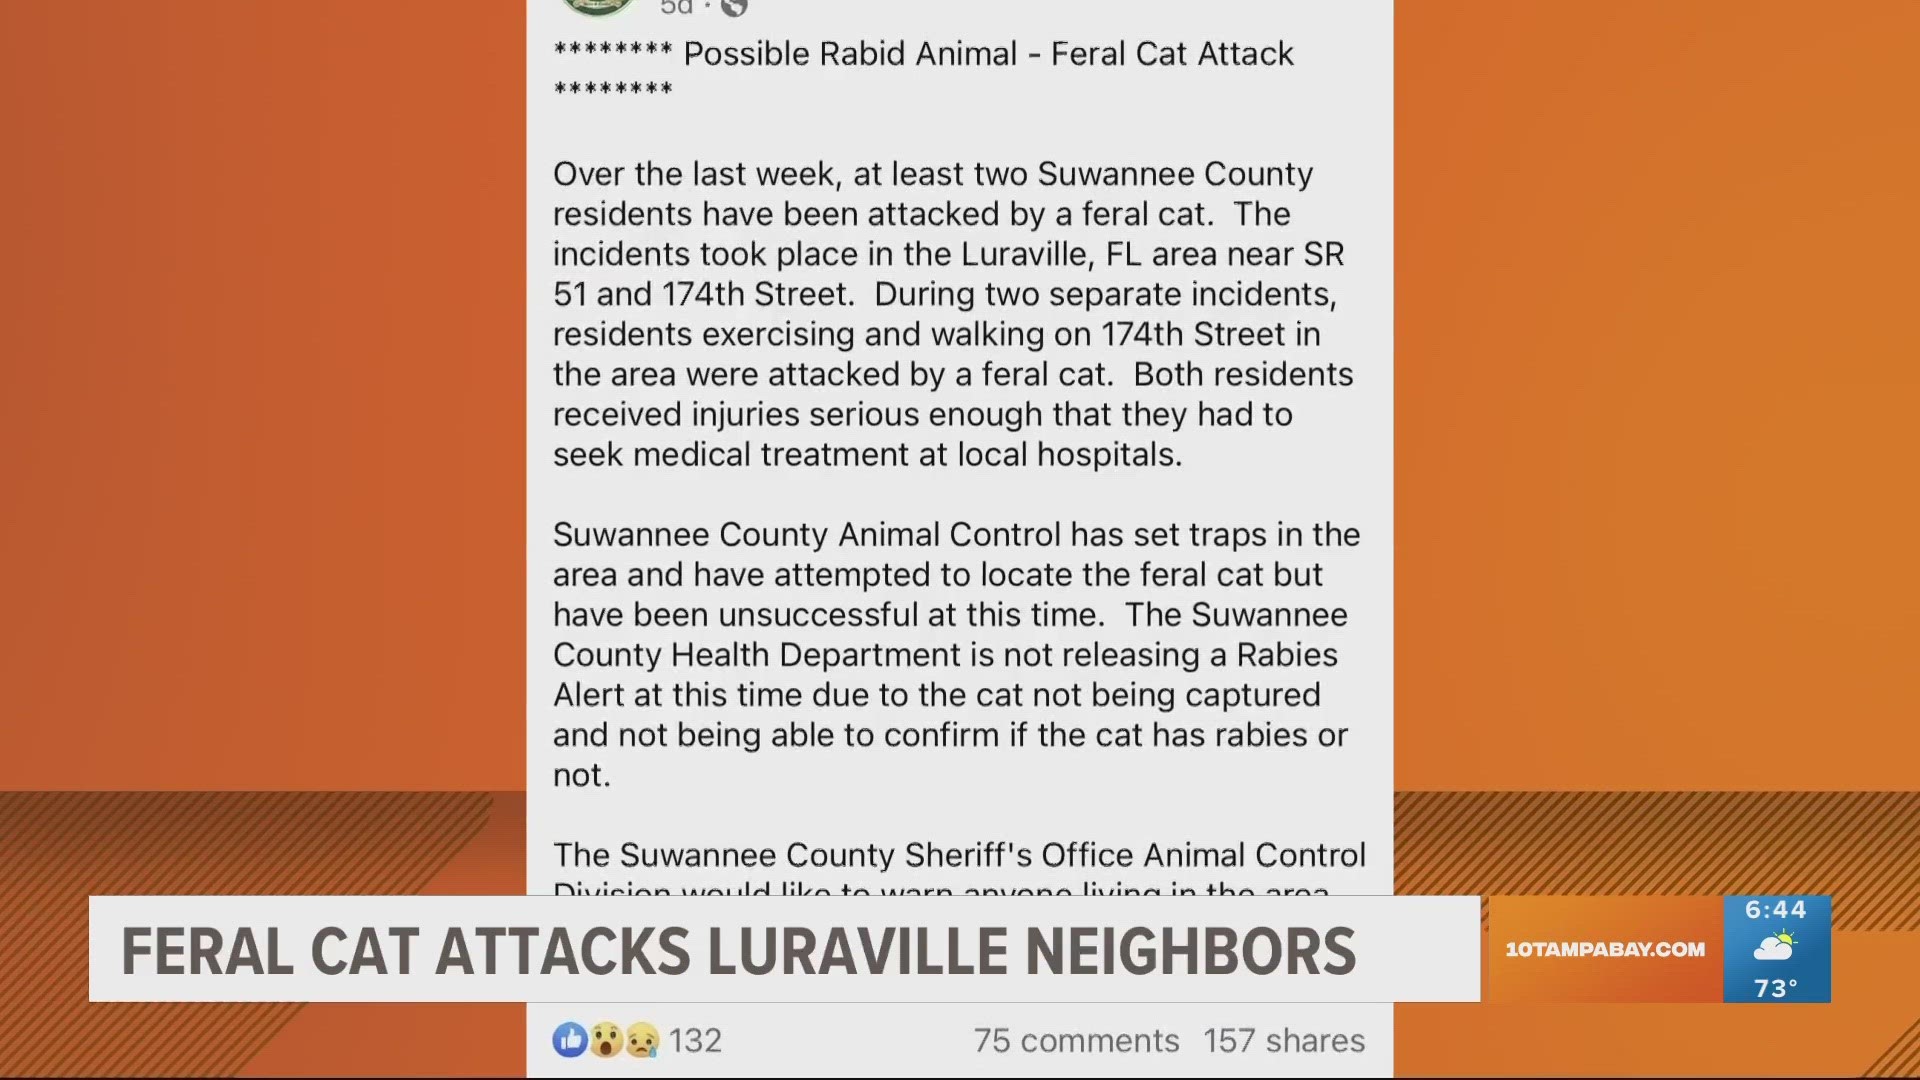 According to deputies, the two separate incidents happened when the residents were exercising and walking in the area of Luraville.